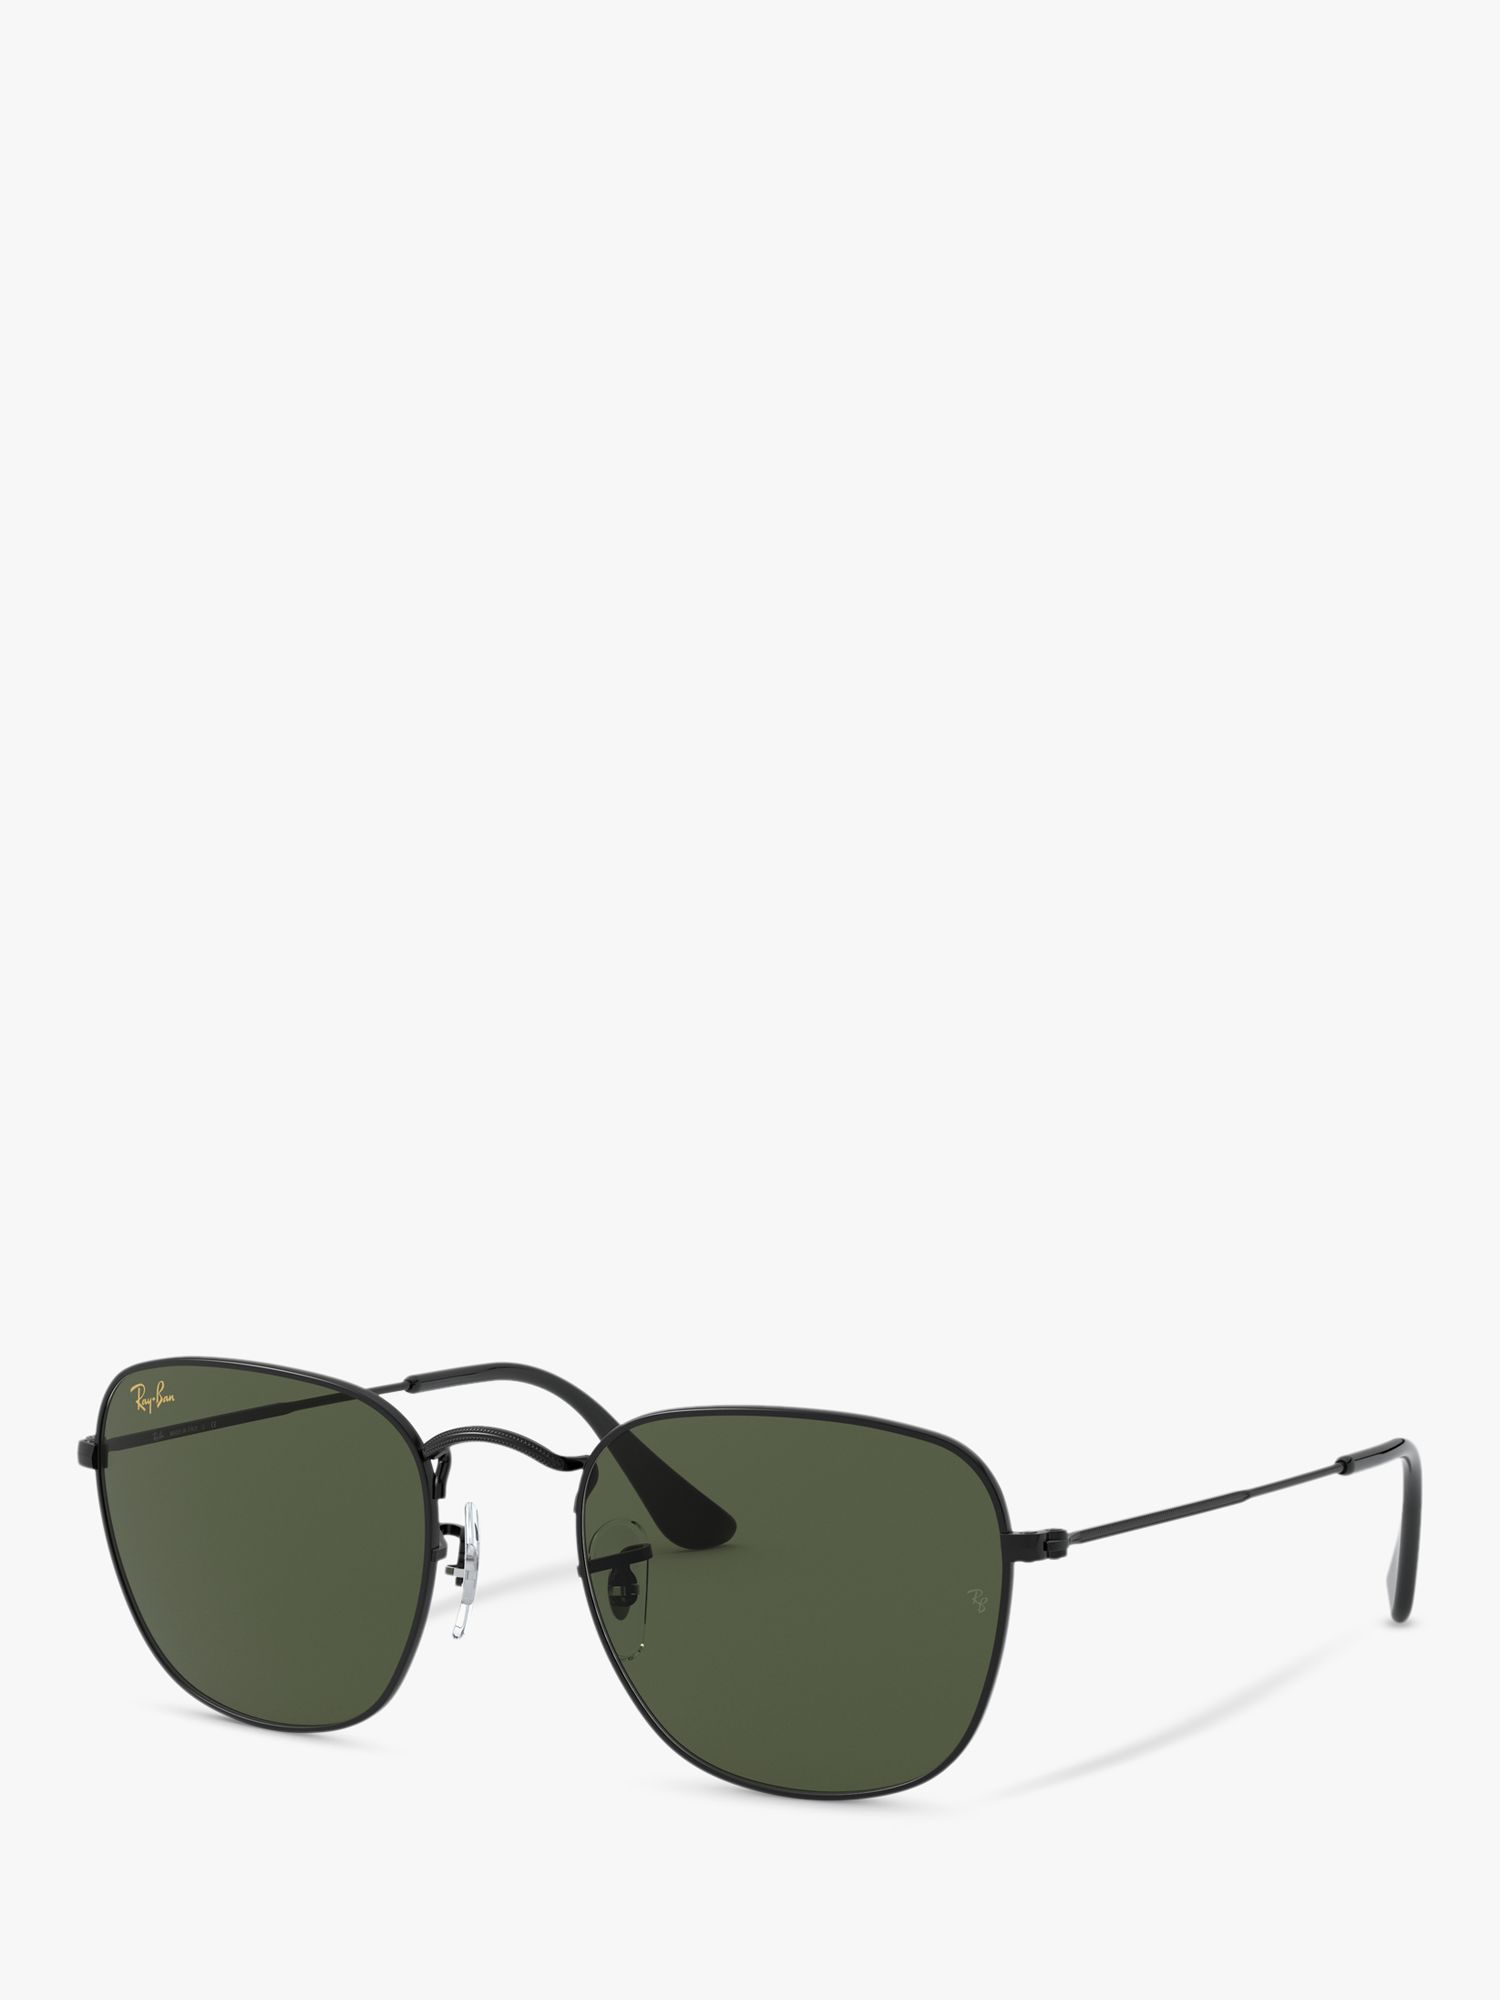 Buy Ray-Ban RB3857 Unisex Square Sunglasses, Black/Green Online at johnlewis.com